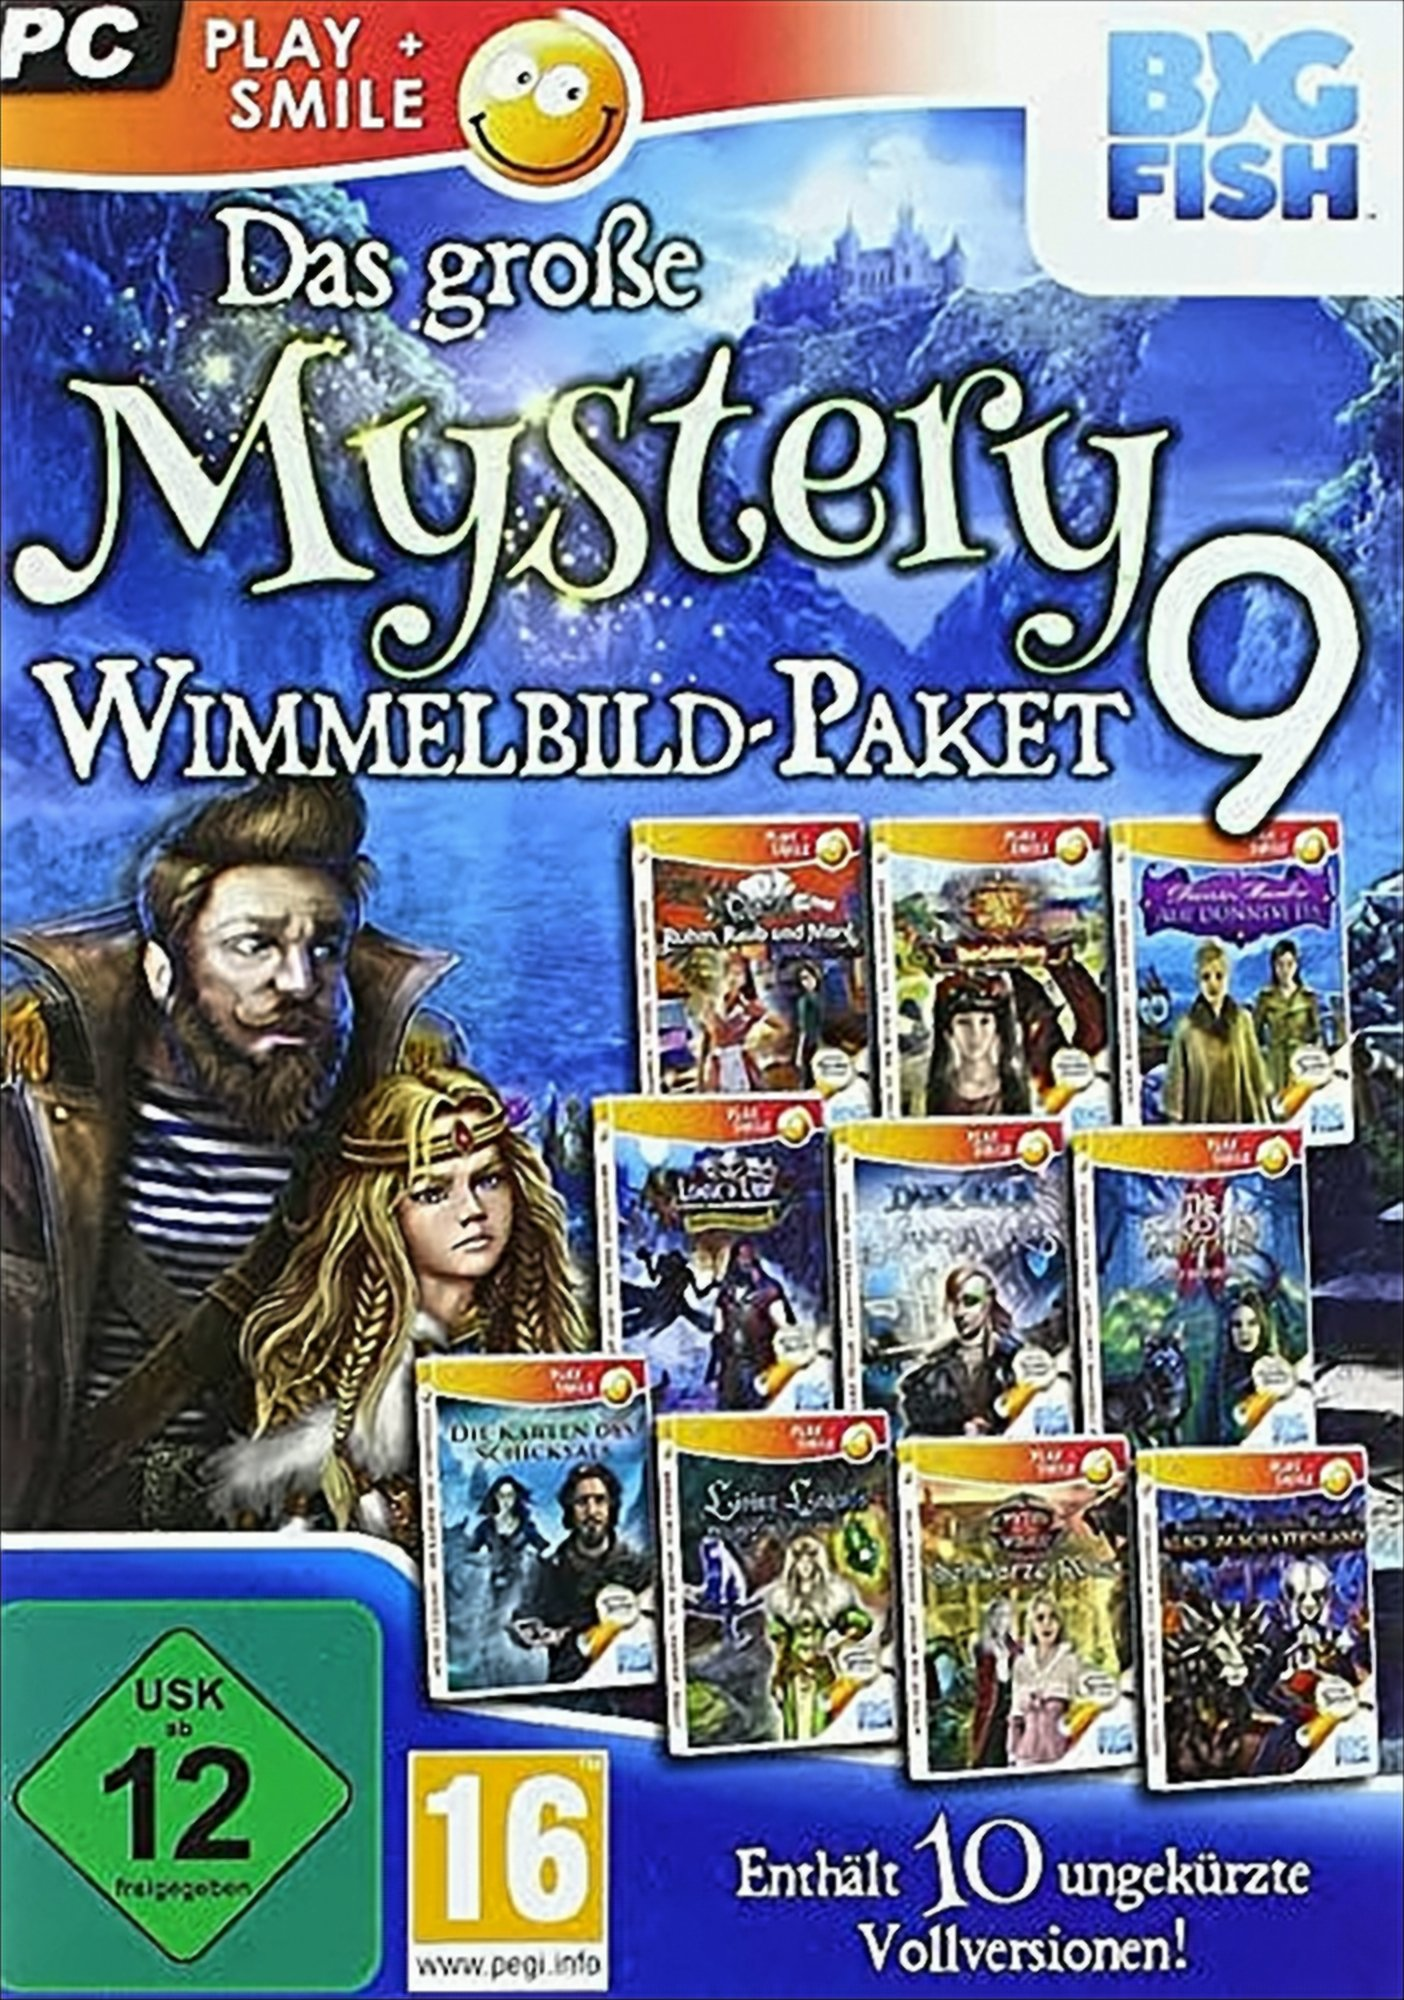 - 9 Mystery Große [PC] Wimmelbildpaket PLAY+SMILE PC